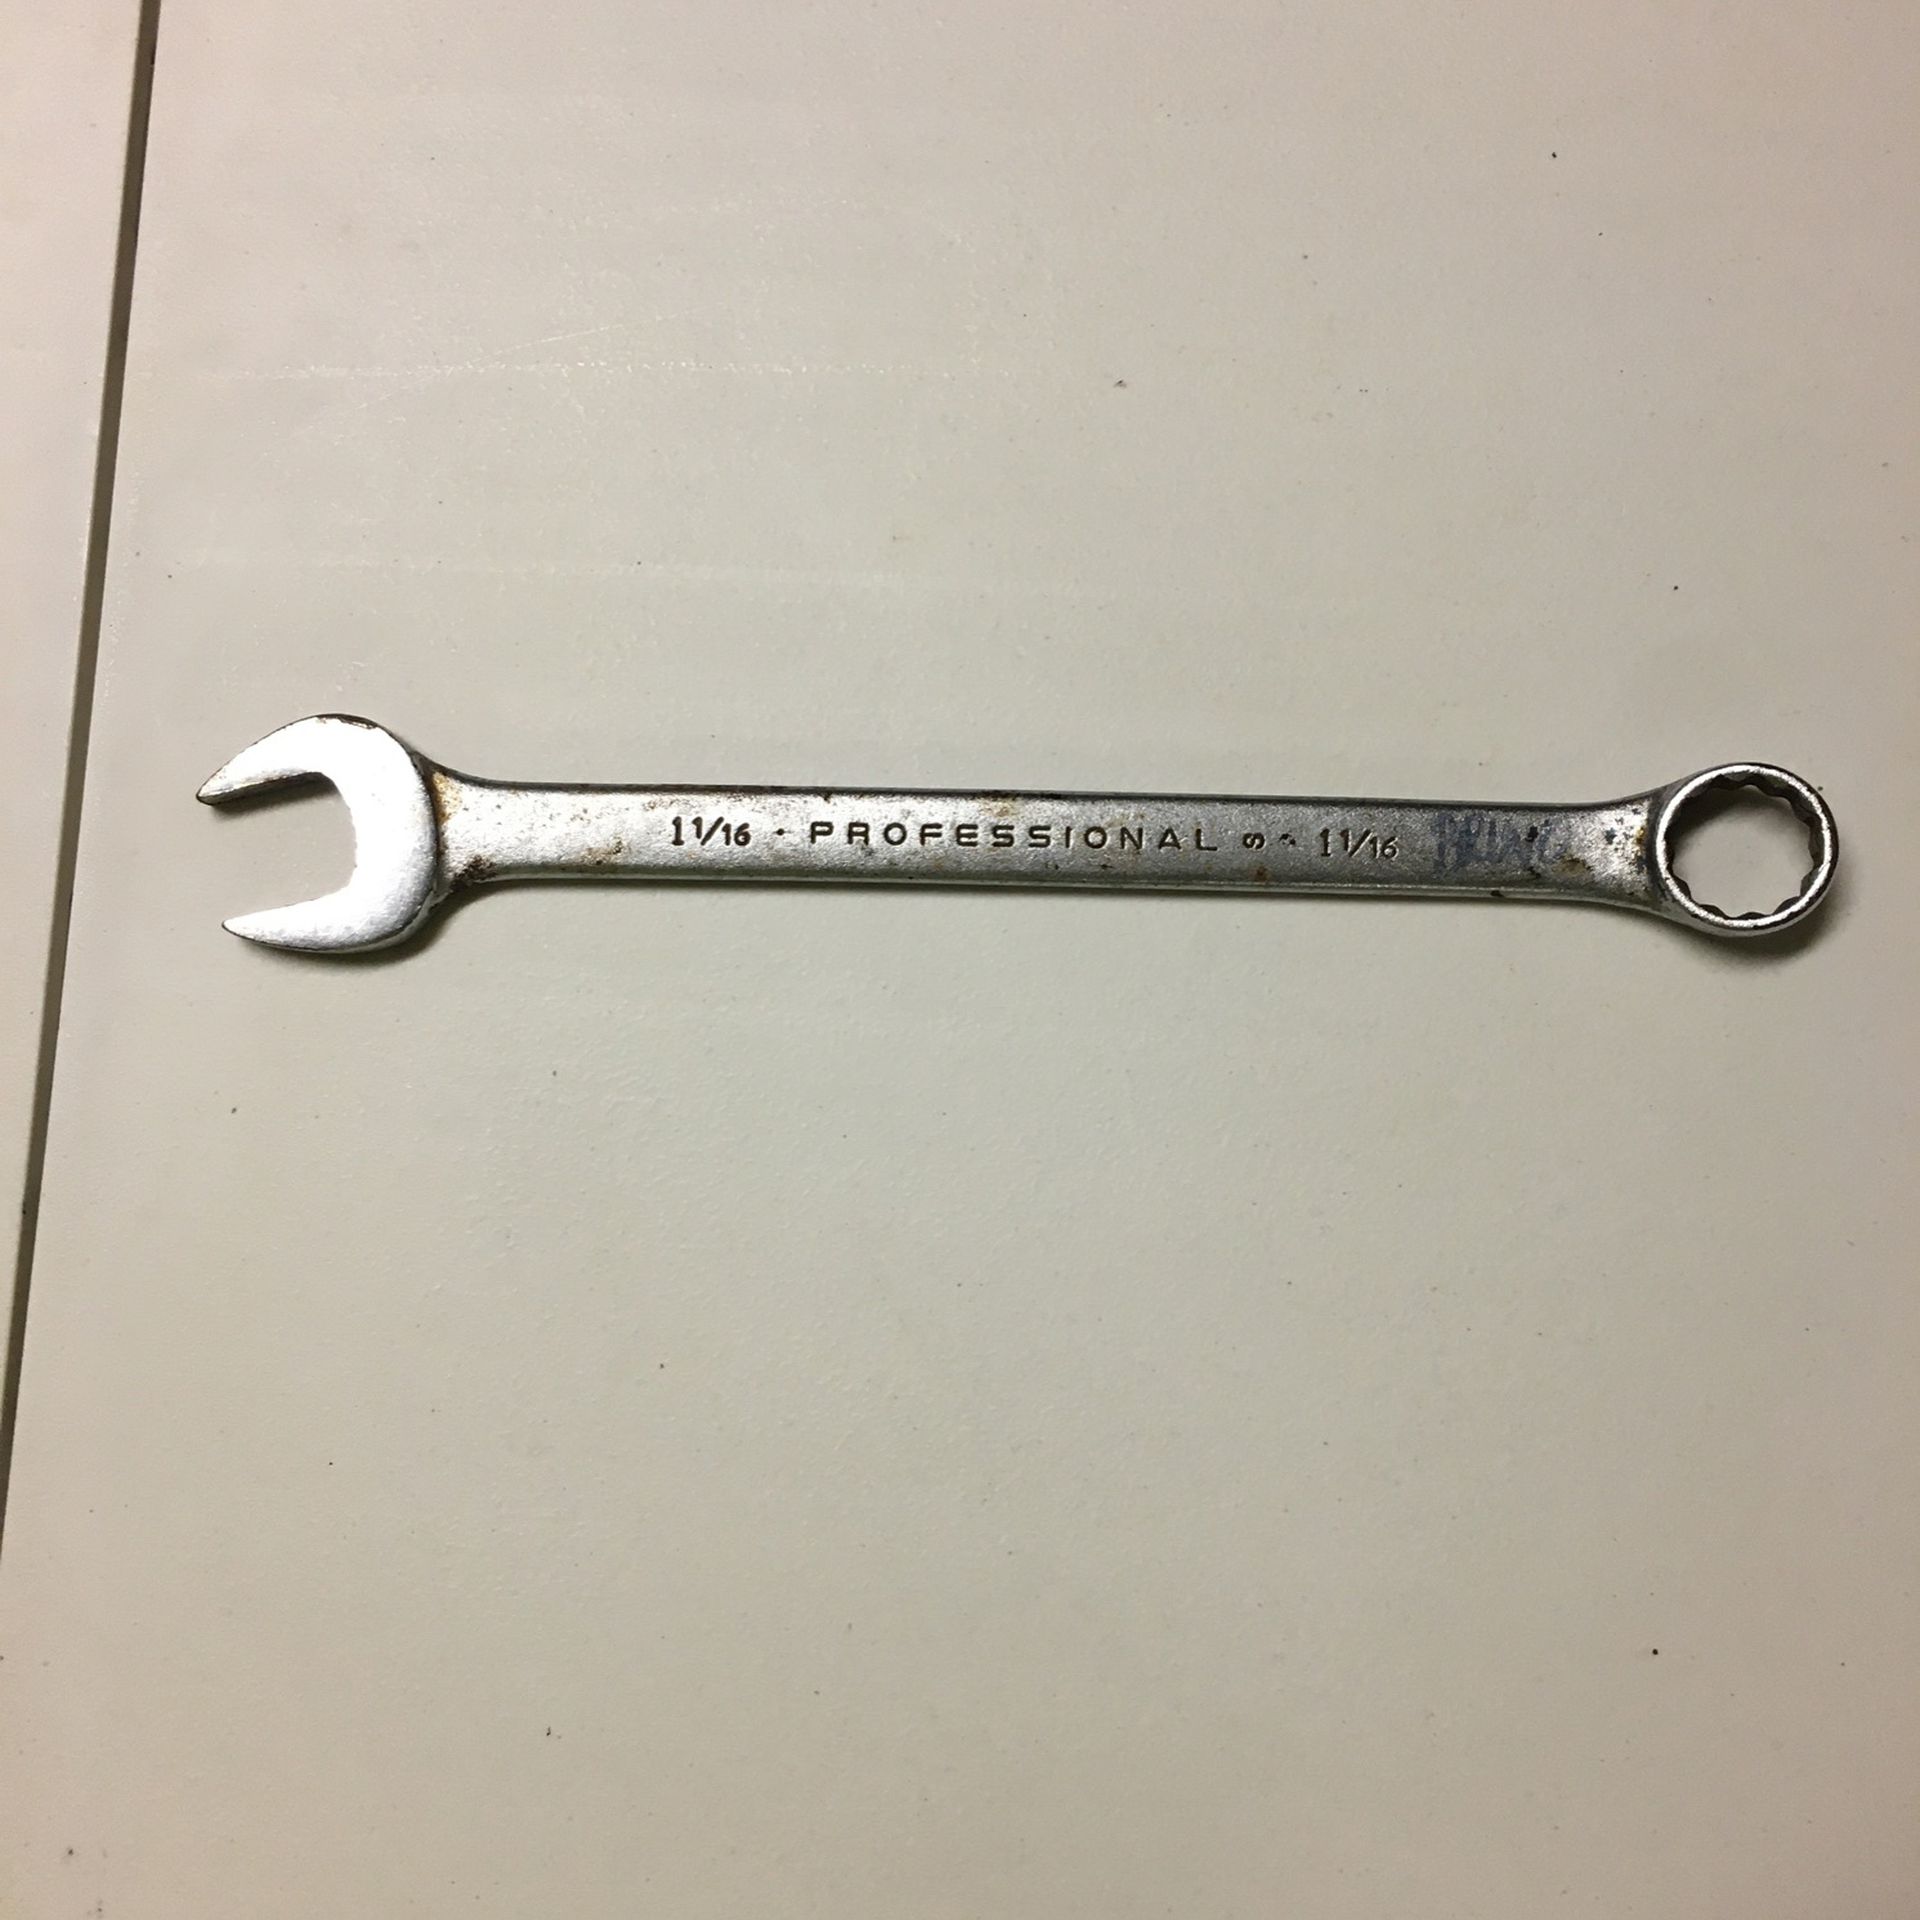 Proto 1 1/16” Combo Wrench